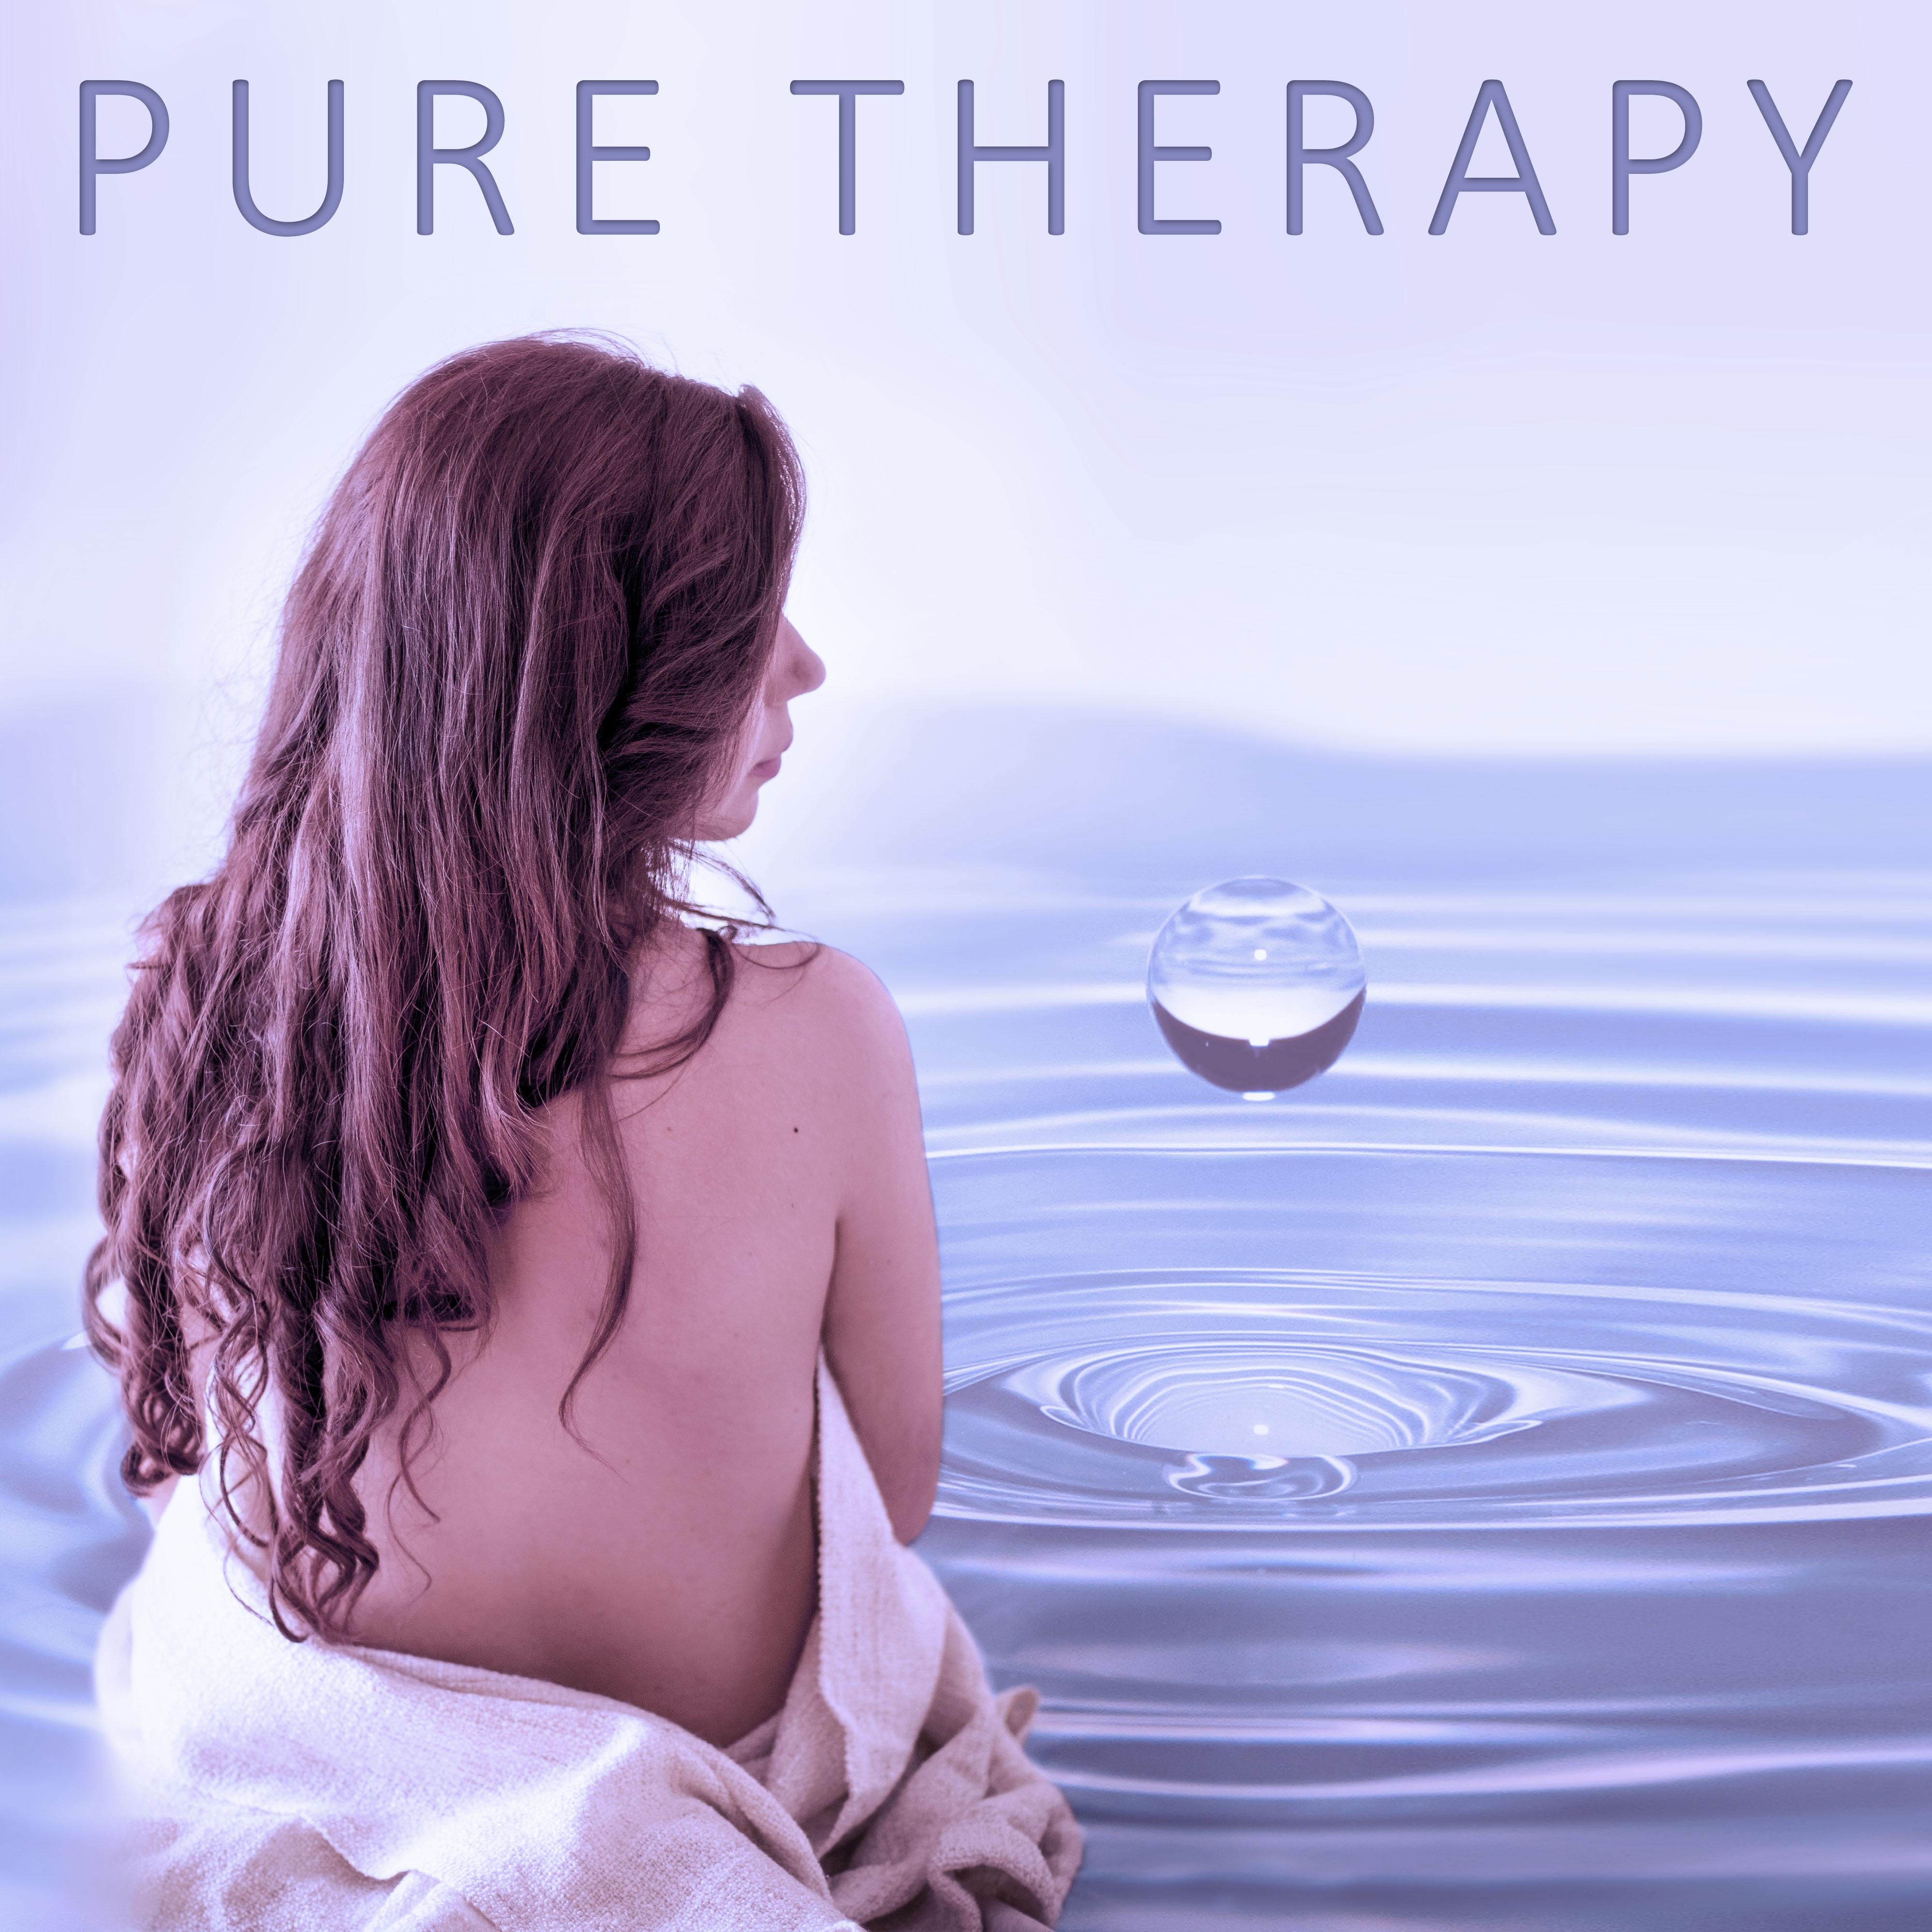 Pure Therapy  Relaxing Music, Pure Massage, Nature Sounds, Calmness, Pure Relaxation, Peaceful Music, Spa